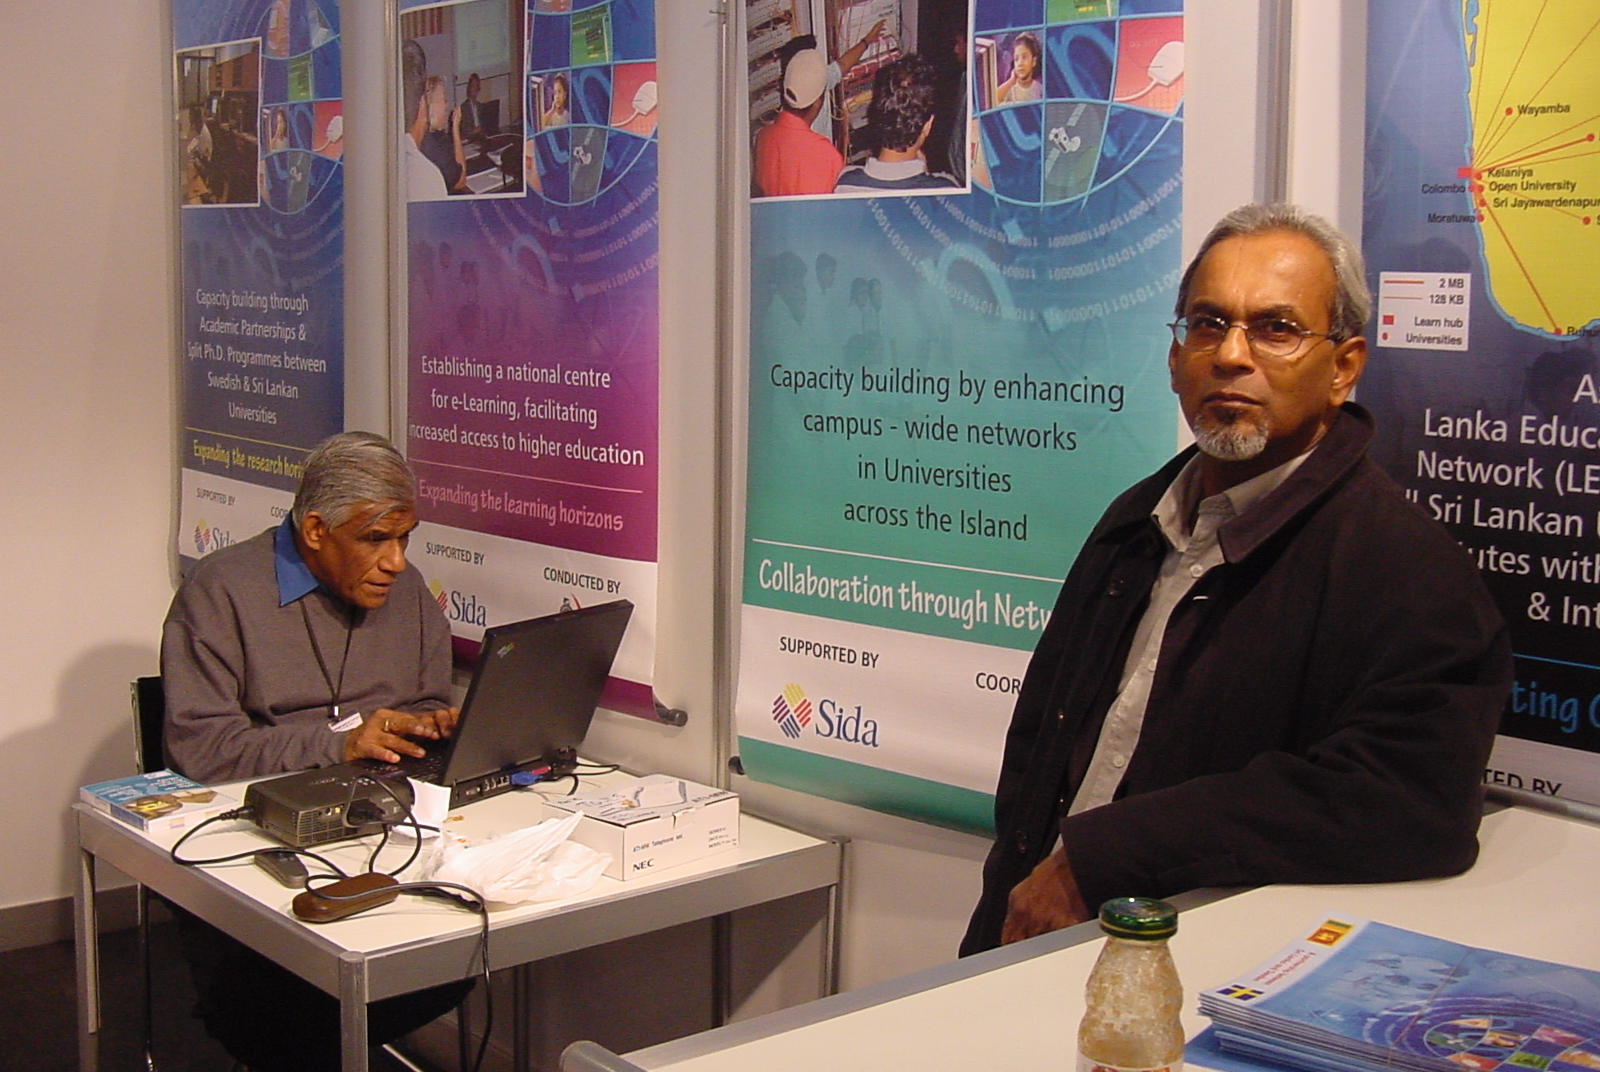 At the UCSC stall with Simon Weerasuriya (author of article on pg. 136 and co-editor of this publication).